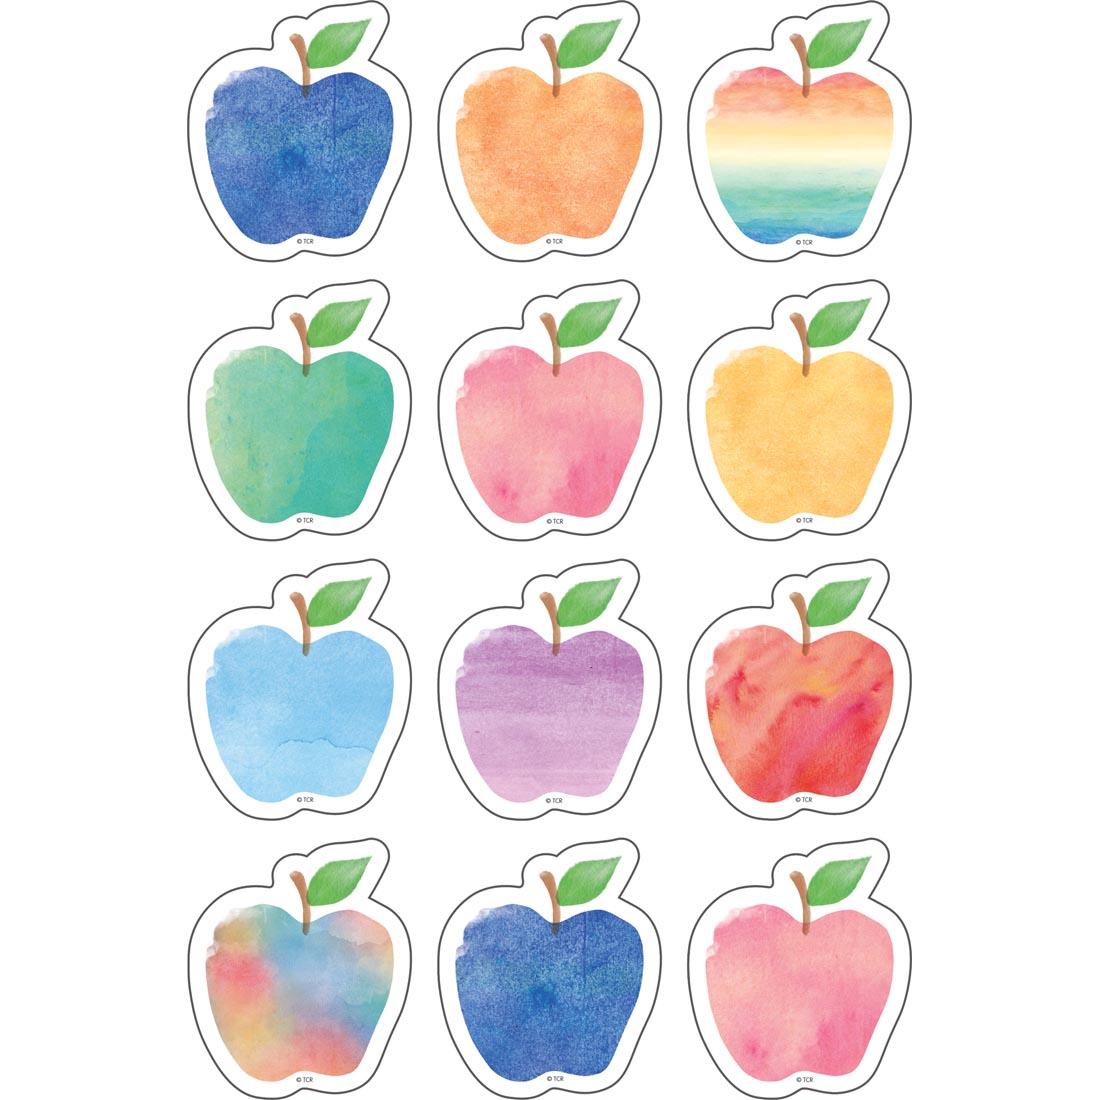 Apples Mini Accents from the Watercolor collection by Teacher Created Resources